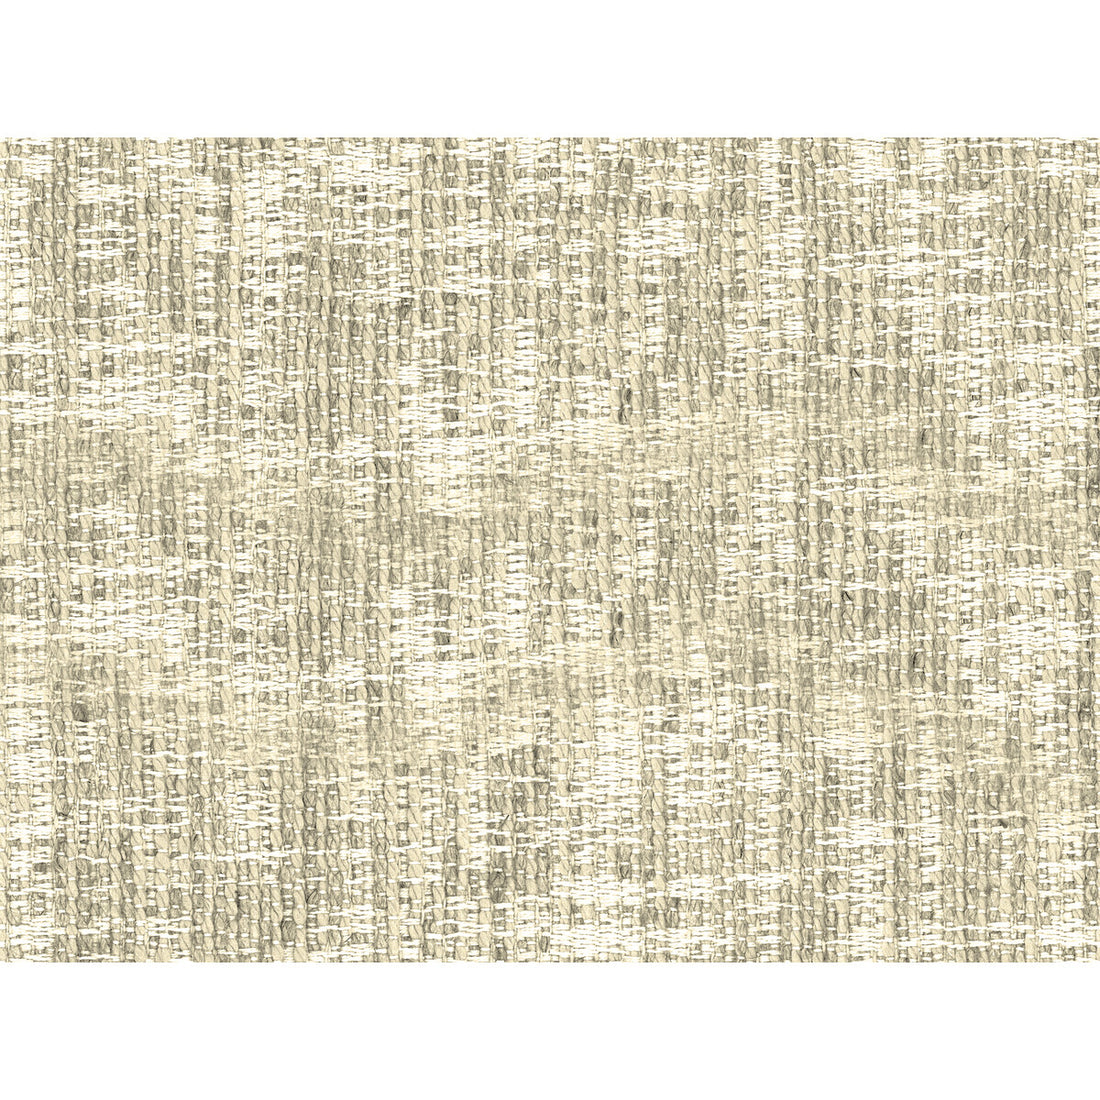 Kravet Couture fabric in 34831-16 color - pattern 34831.16.0 - by Kravet Couture in the Mabley Handler collection